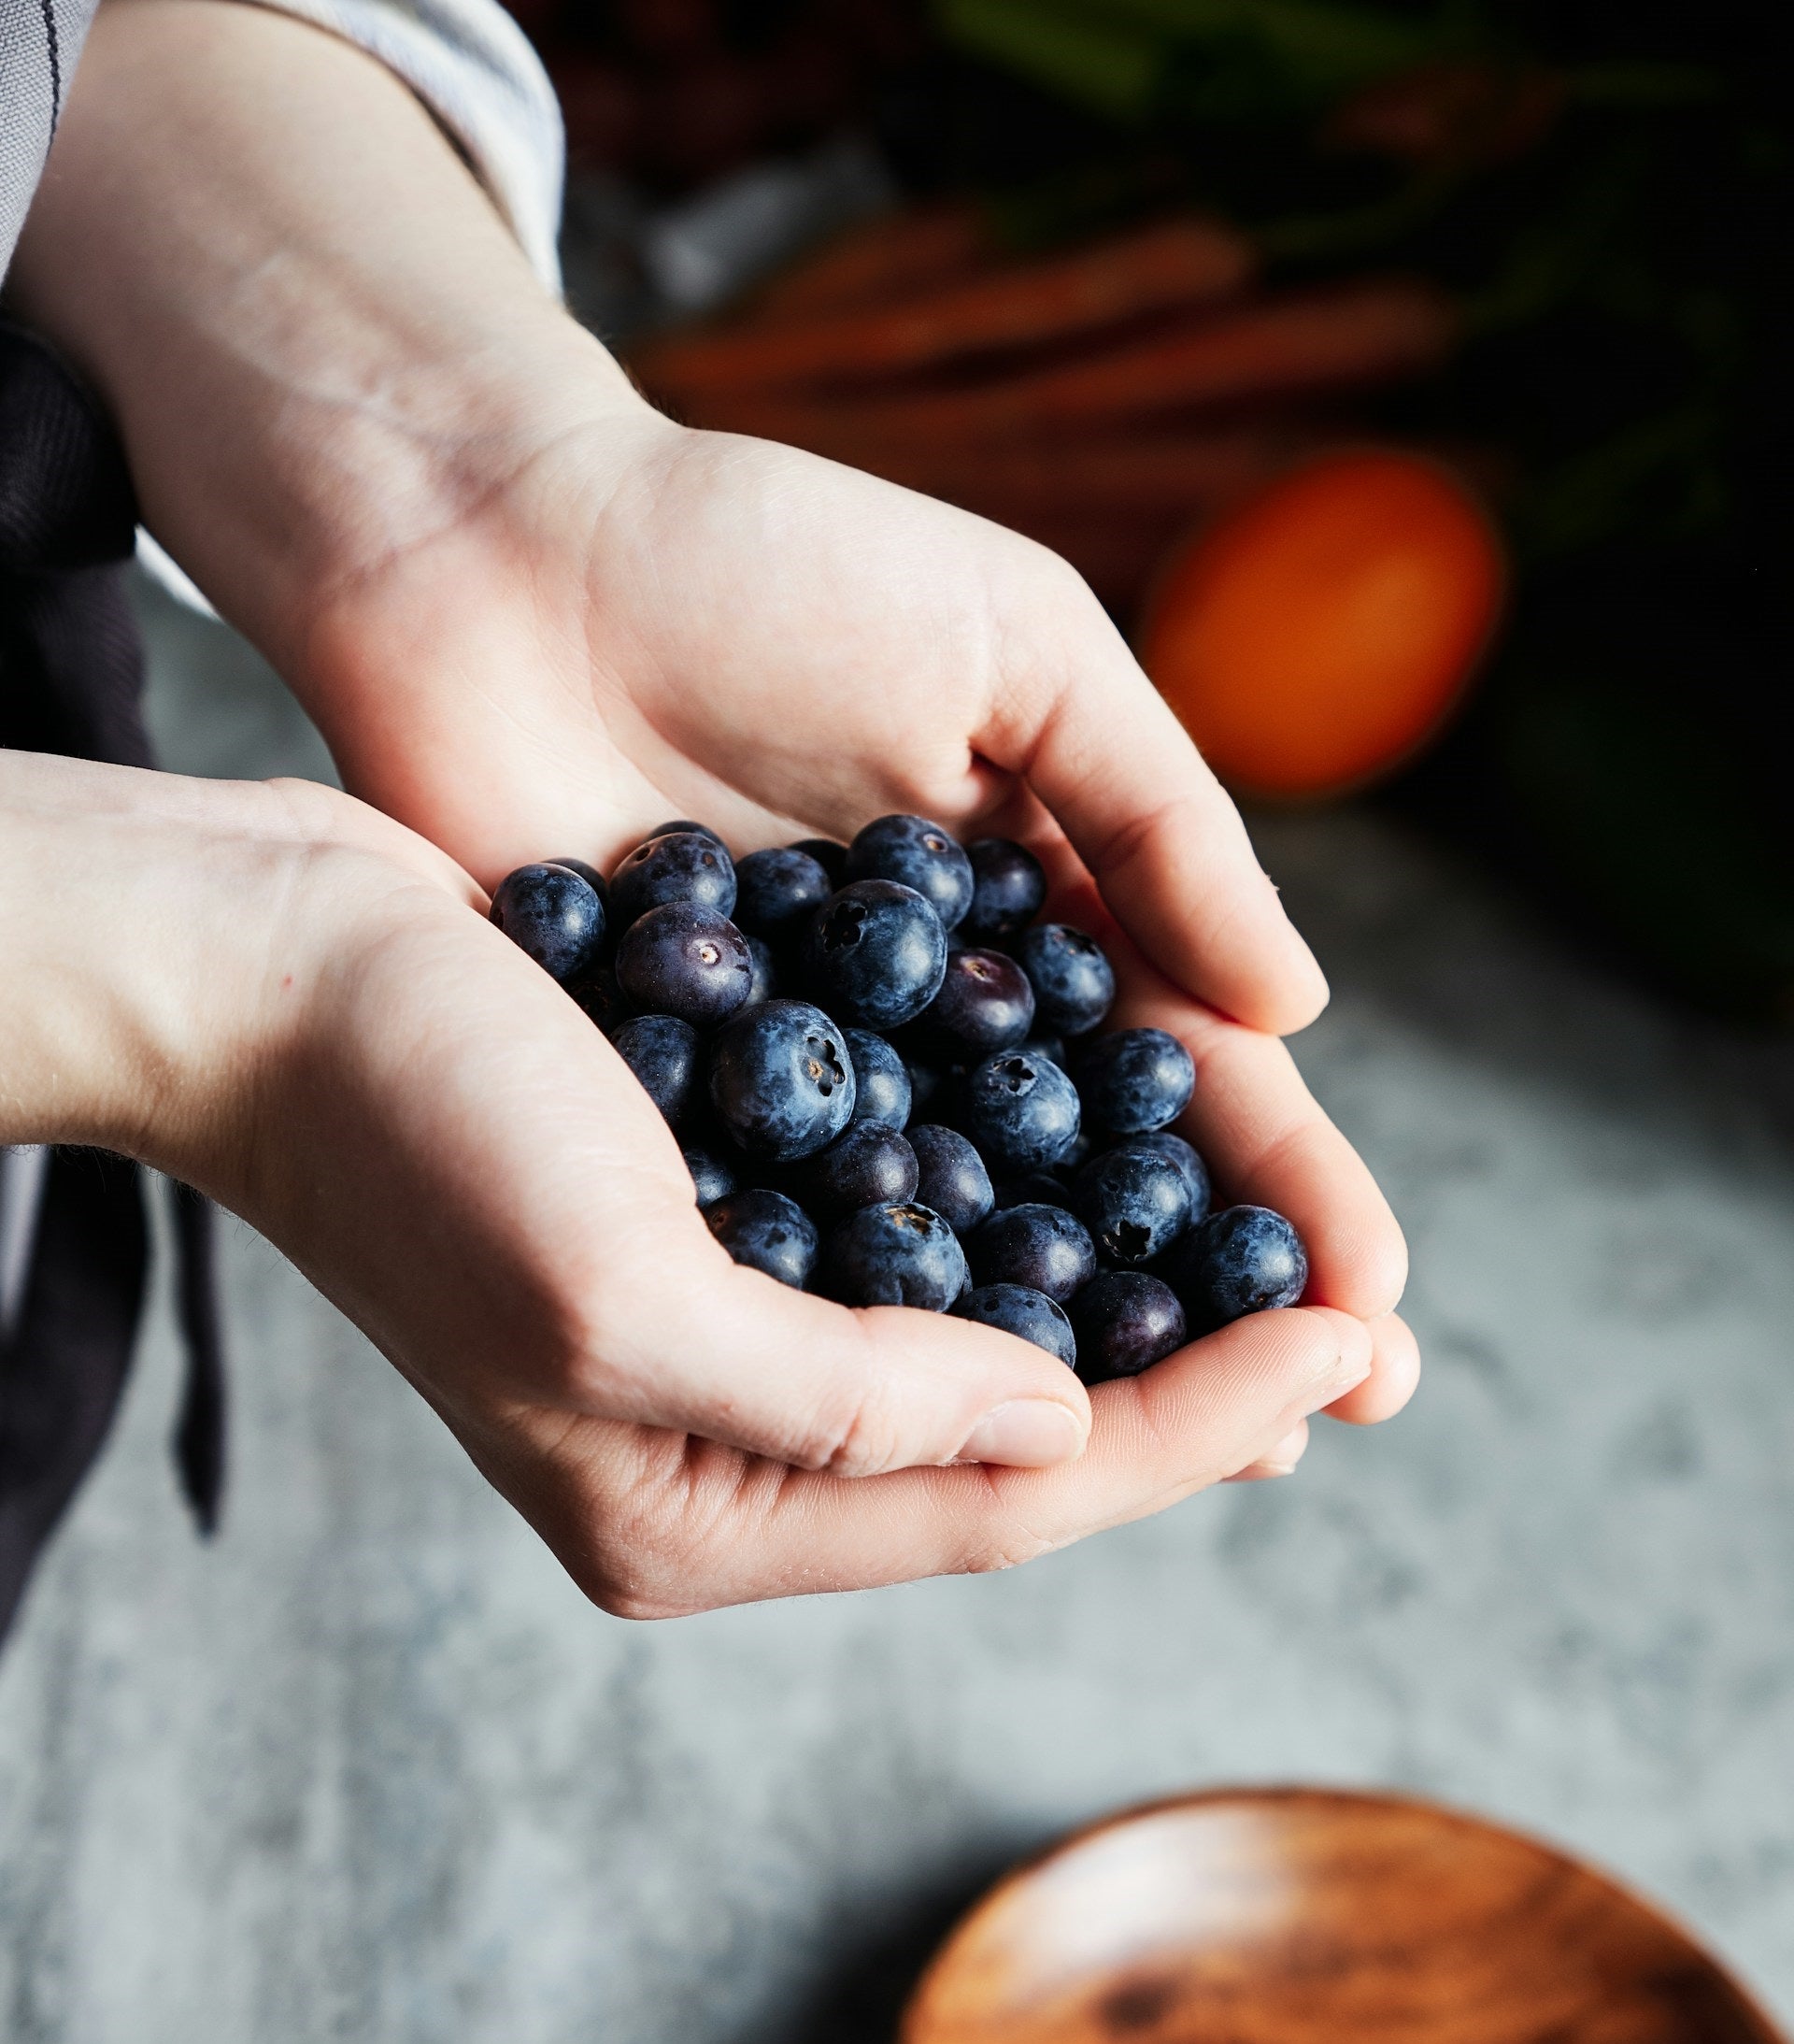 How To Store Fresh Blueberries In The Refrigerator? | Fridge.com